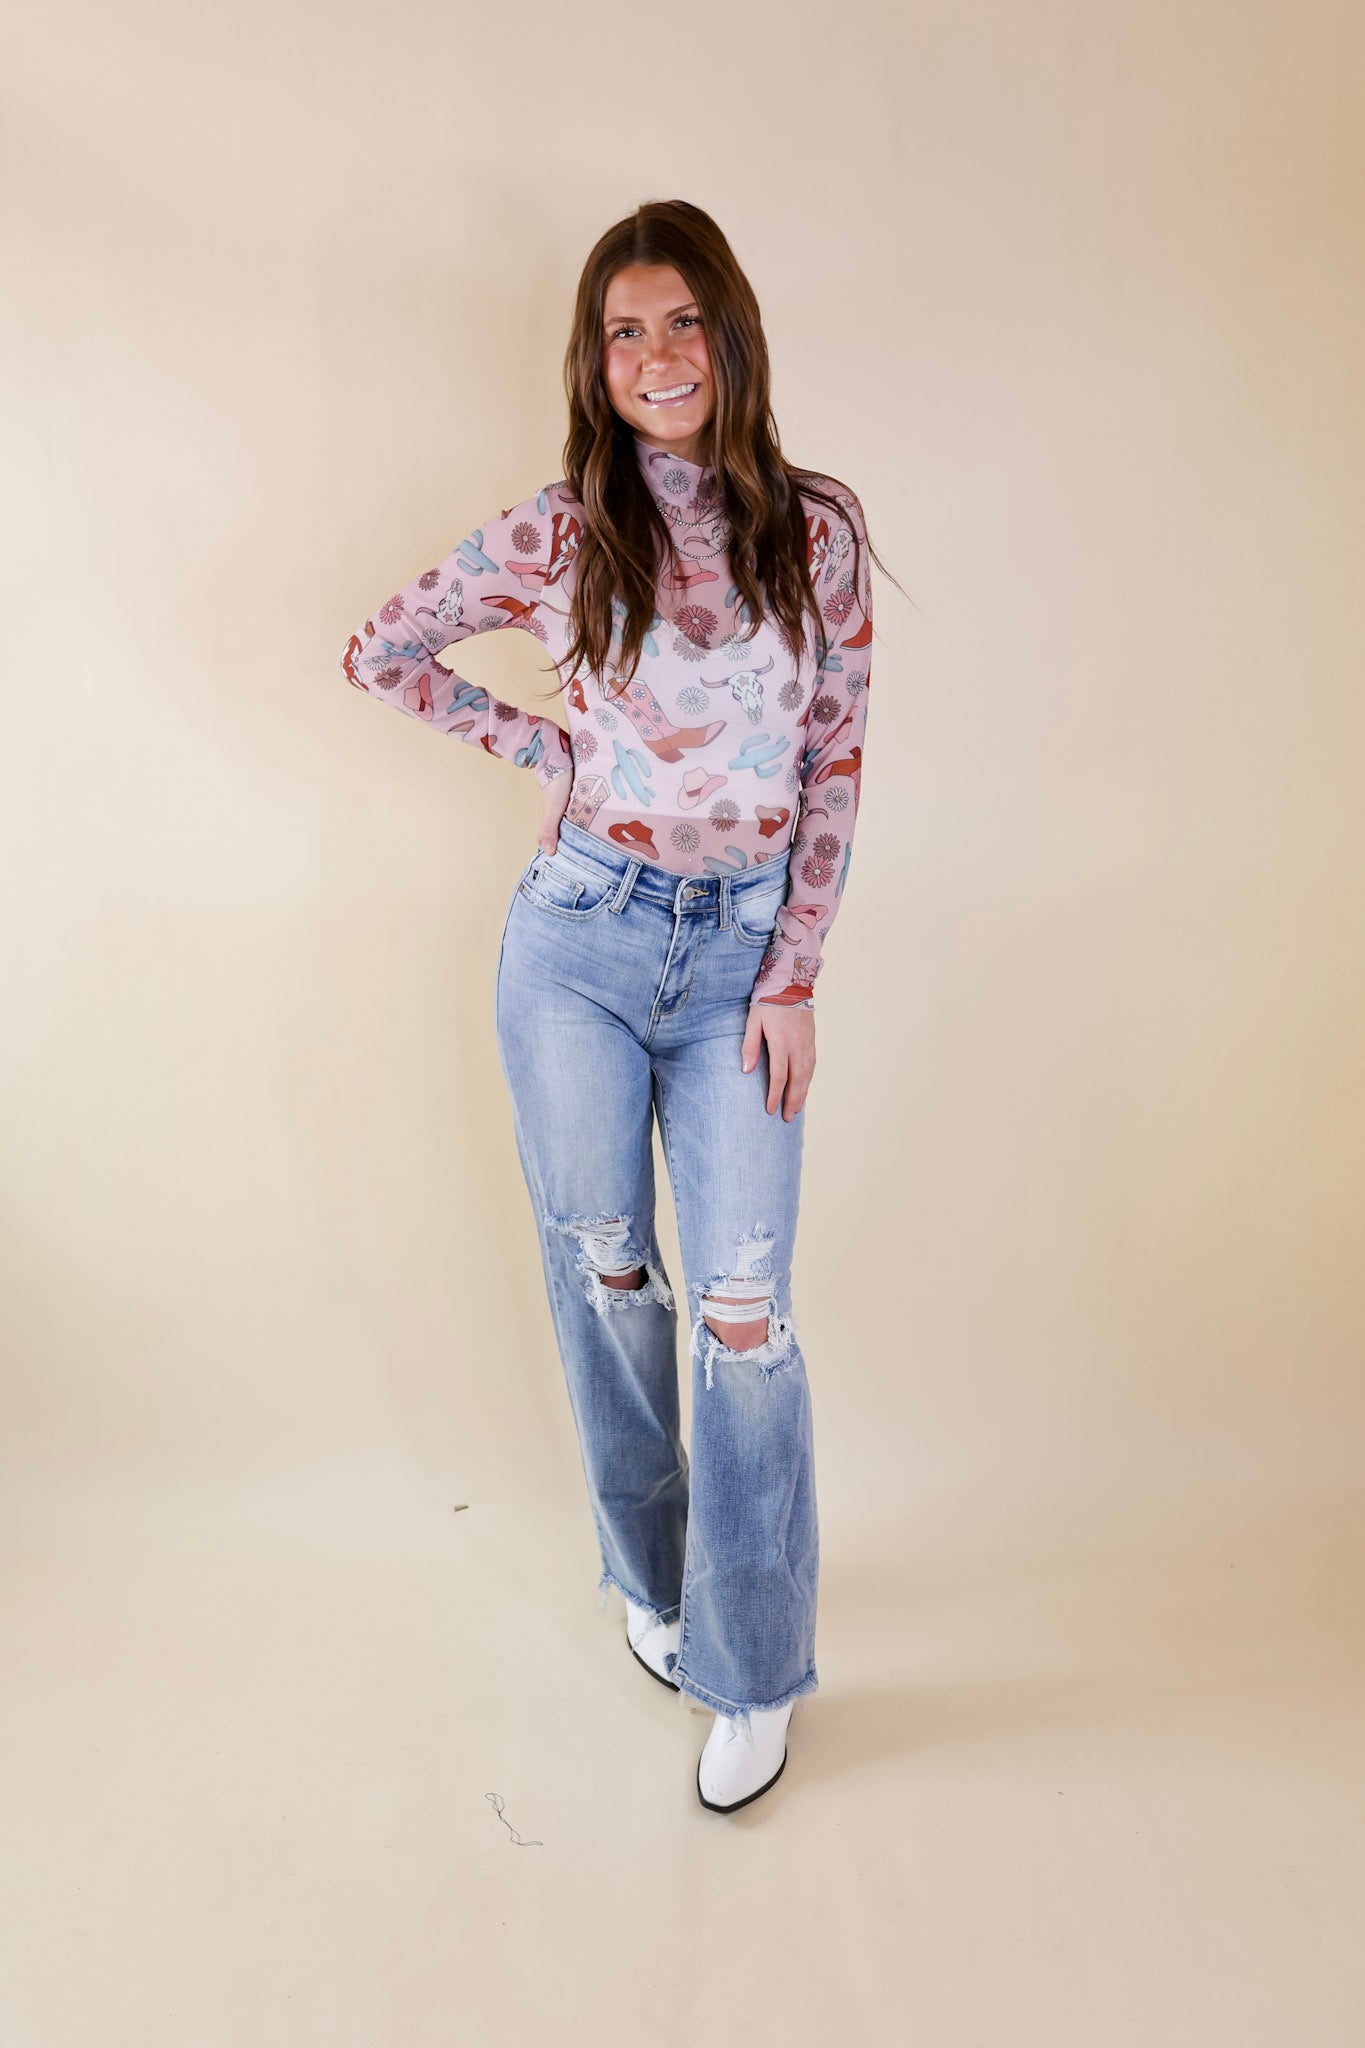 Try Your Luck Western Print Mesh Long Sleeve Bodysuit in Blush Pink - Giddy Up Glamour Boutique